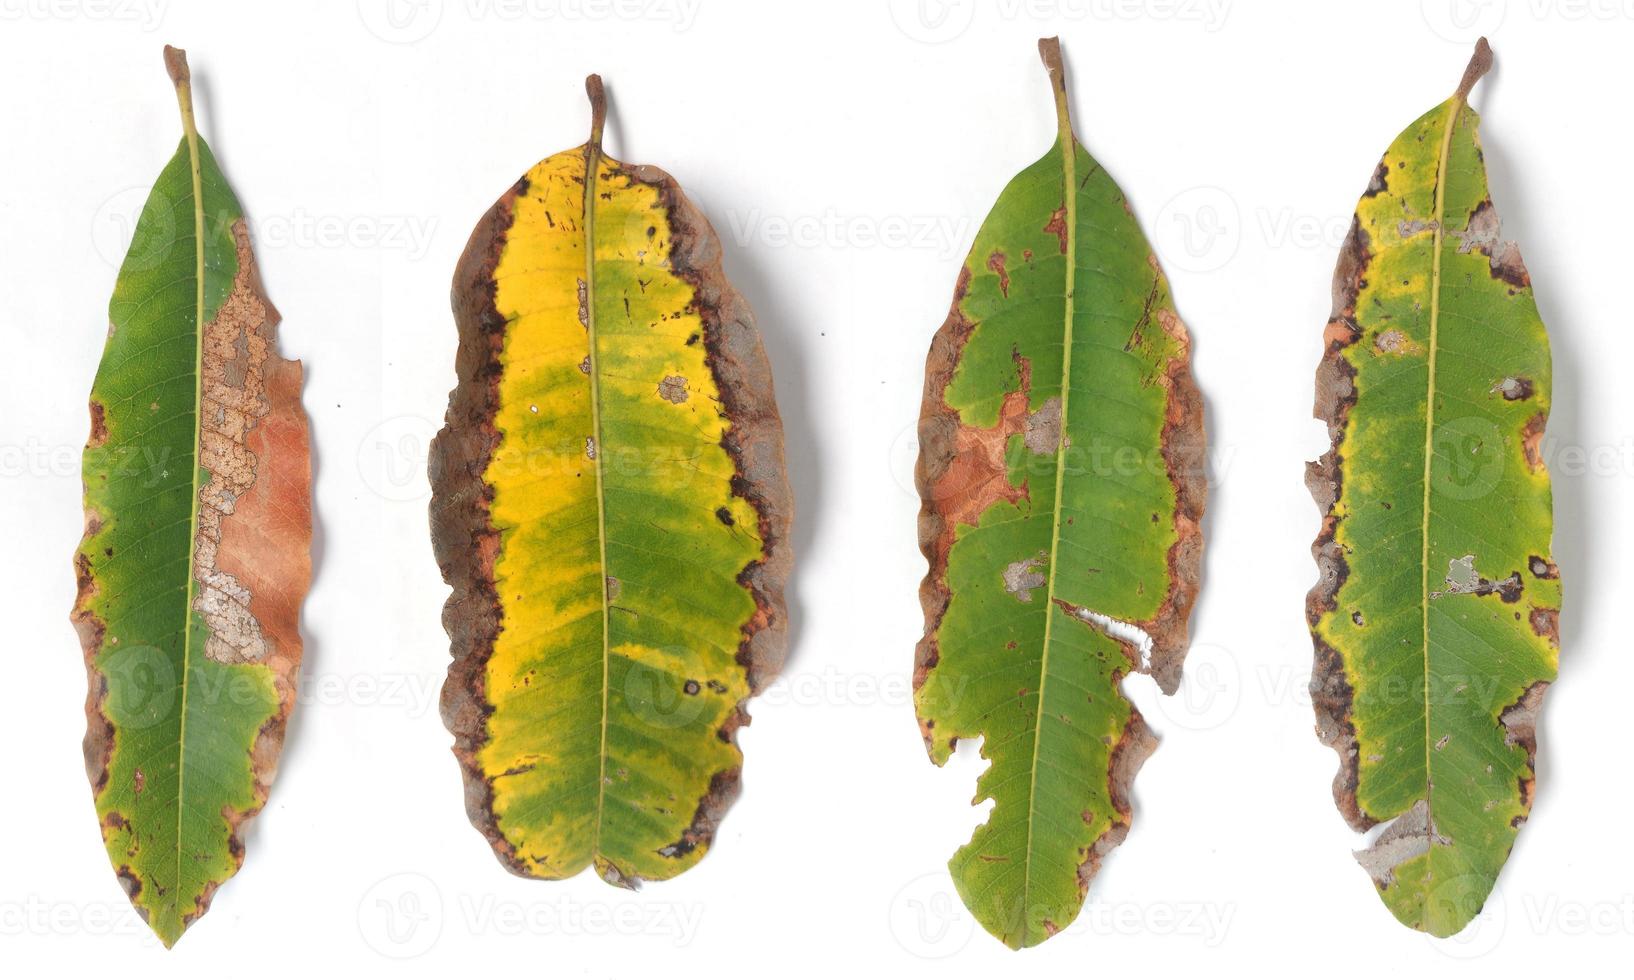 macronutrient deficient mango leaves isolated on white background, mango leaves with leaf disease, leaf margins yellow, leaf imperfect. photo